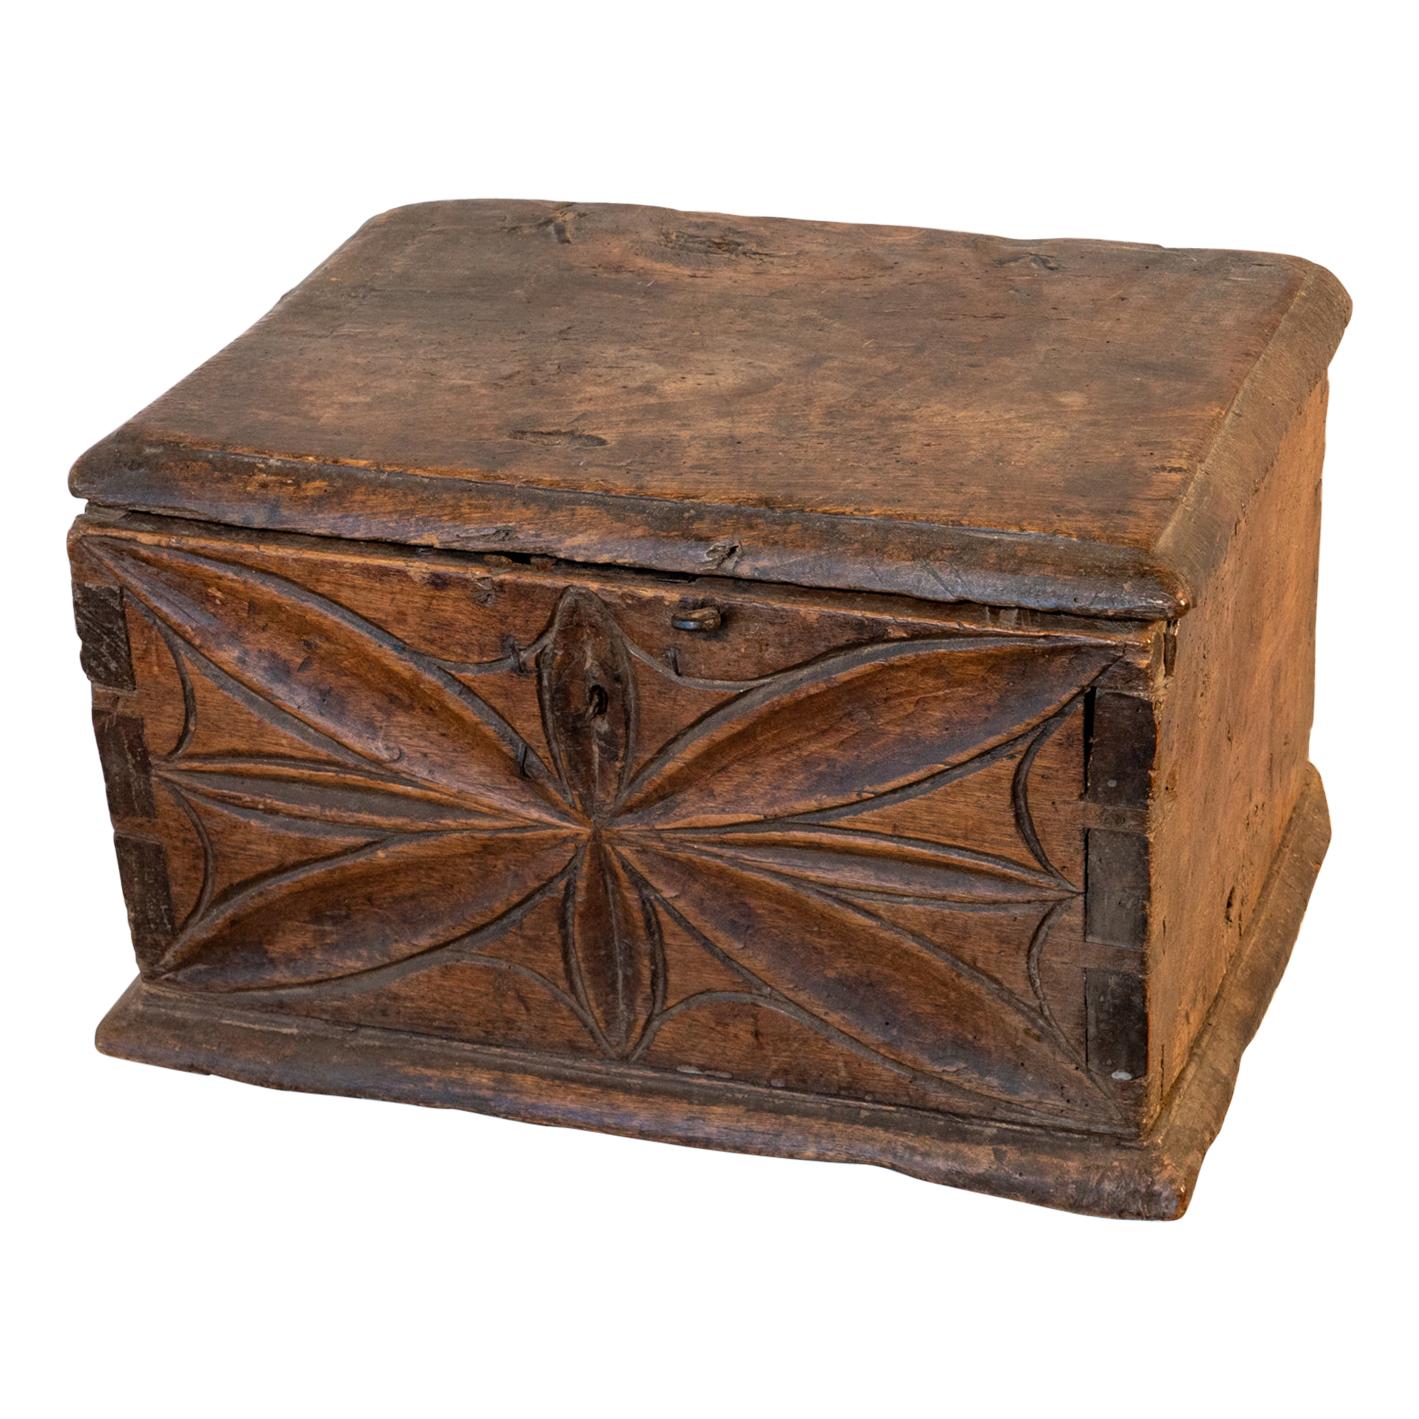 Early 18th Century Italian Carved and Dovetailed Walnut Alms Box